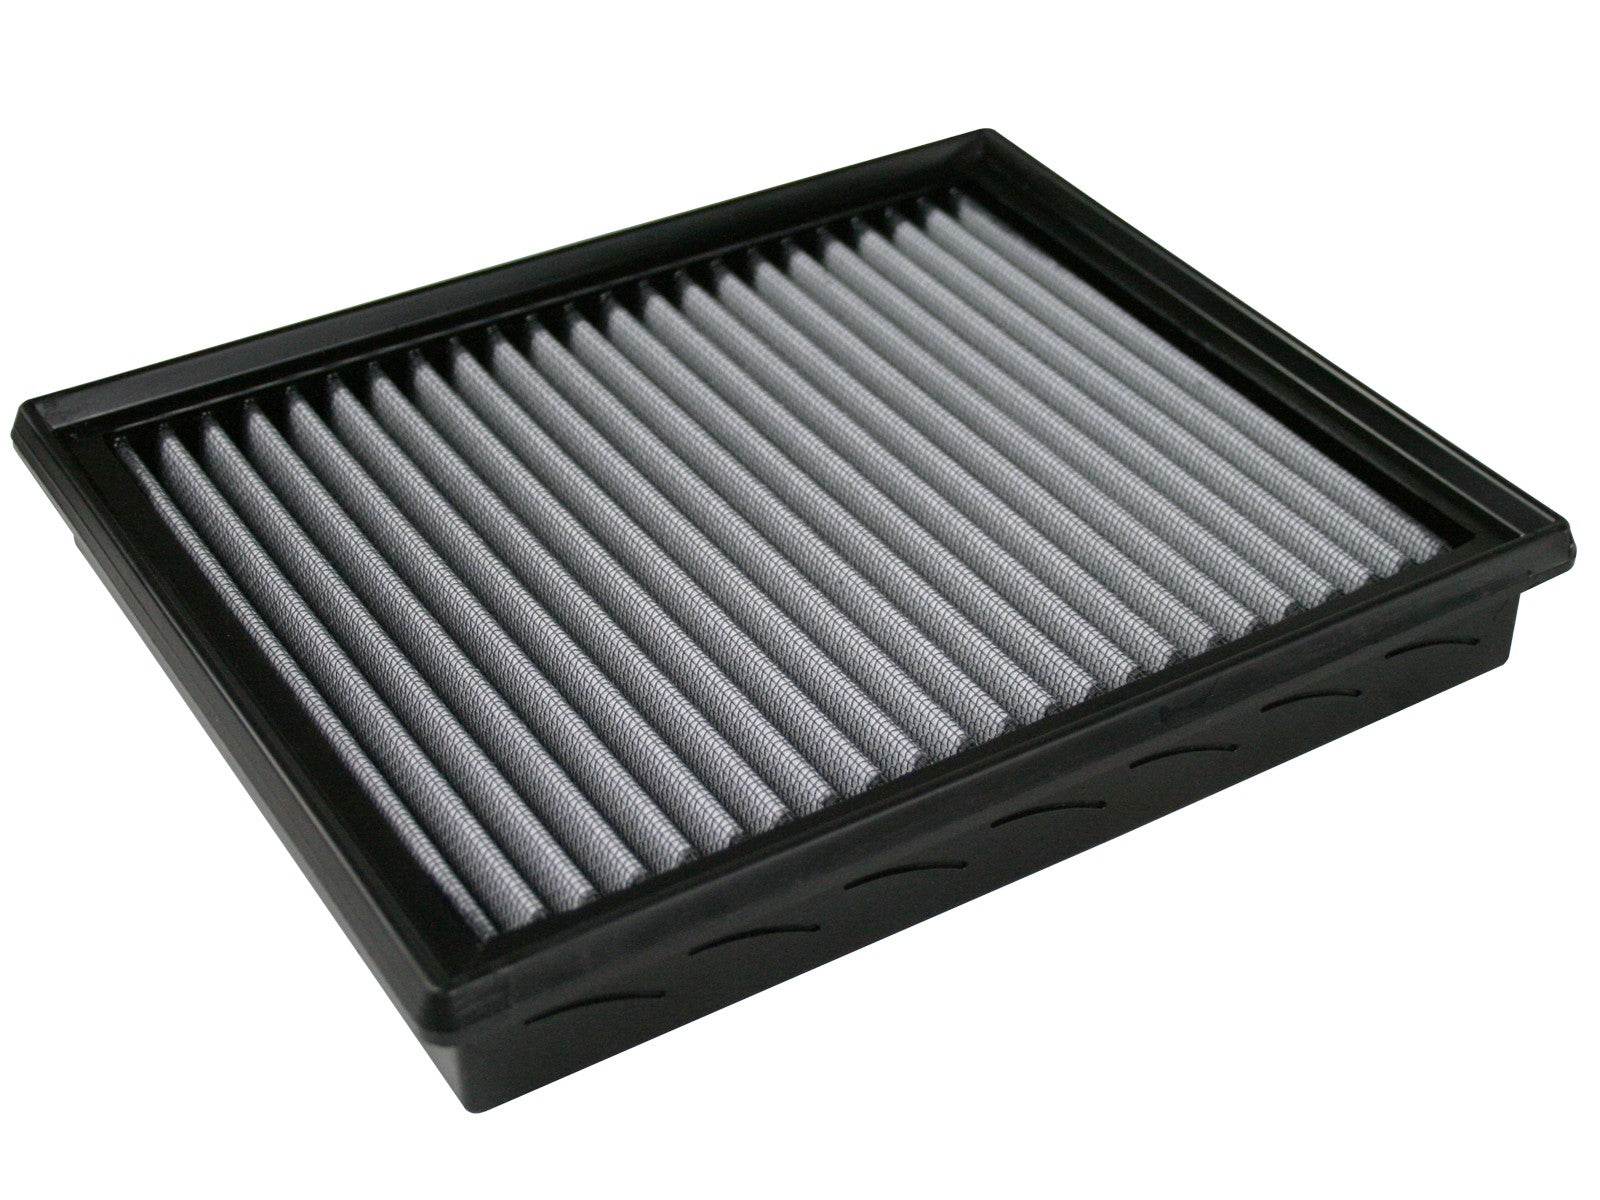 Magnum FLOW OE Replacement Air Filter w/ Pro DRY S Media Audi Cars 96-05 / BMW Cars 93-06 / Volkswagen Cars 98-05